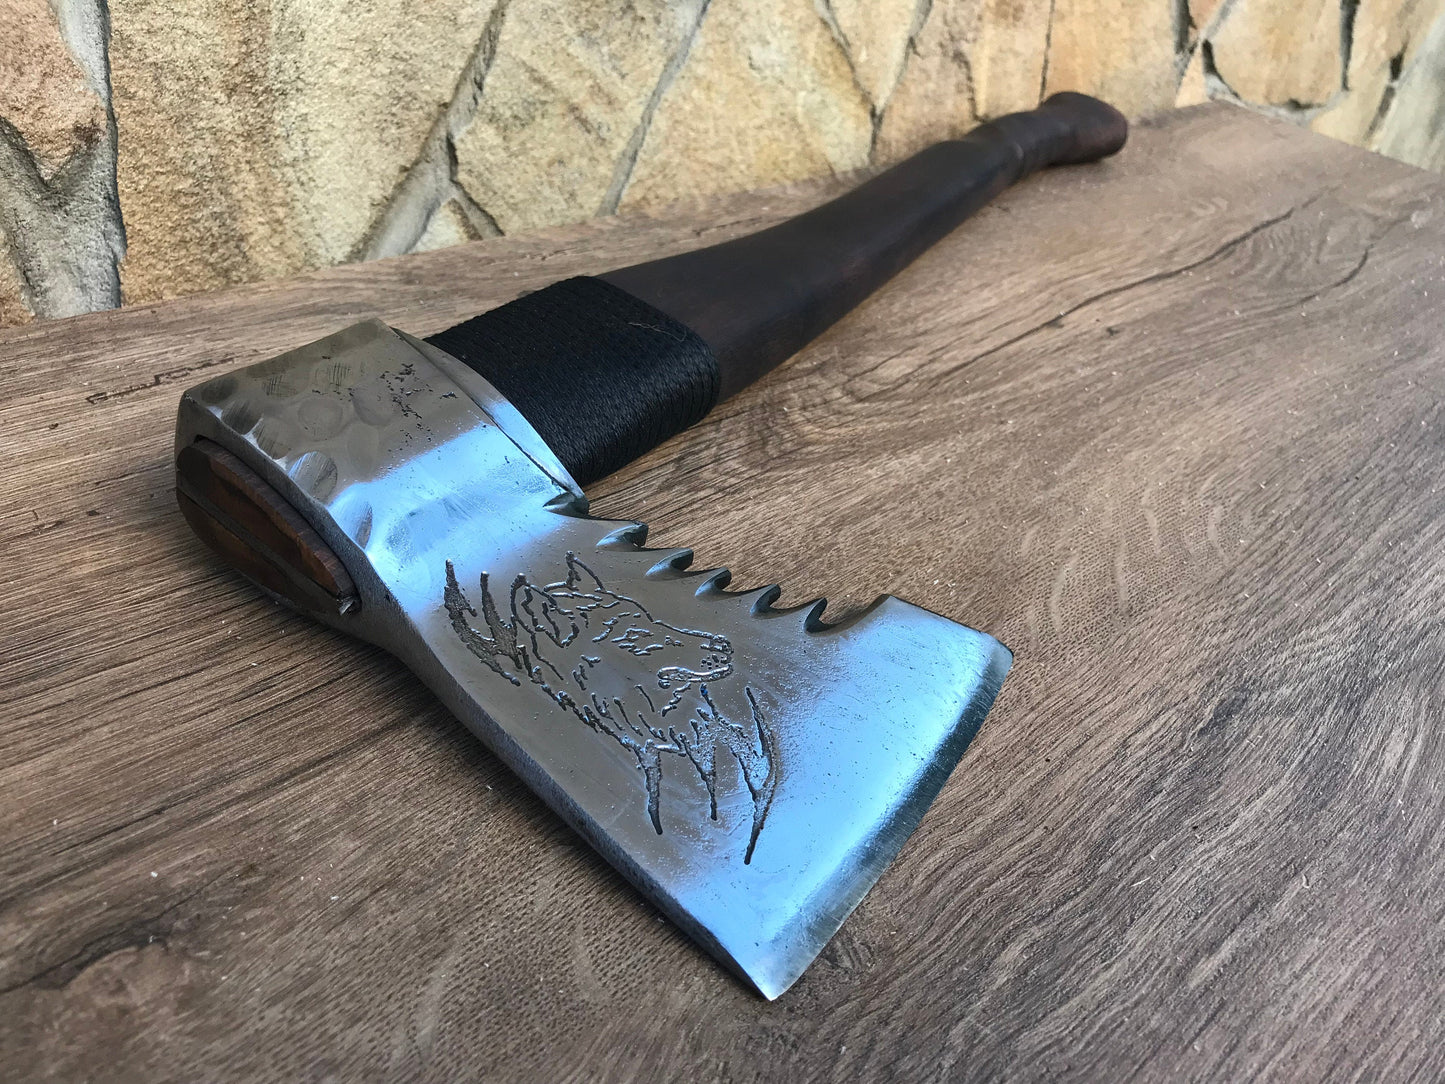 Personalized axe, leather sheath, viking axe, wolf, mens tools, handyman gifts, wolf decor, tools, gifts for men, gifts for dad,etched image